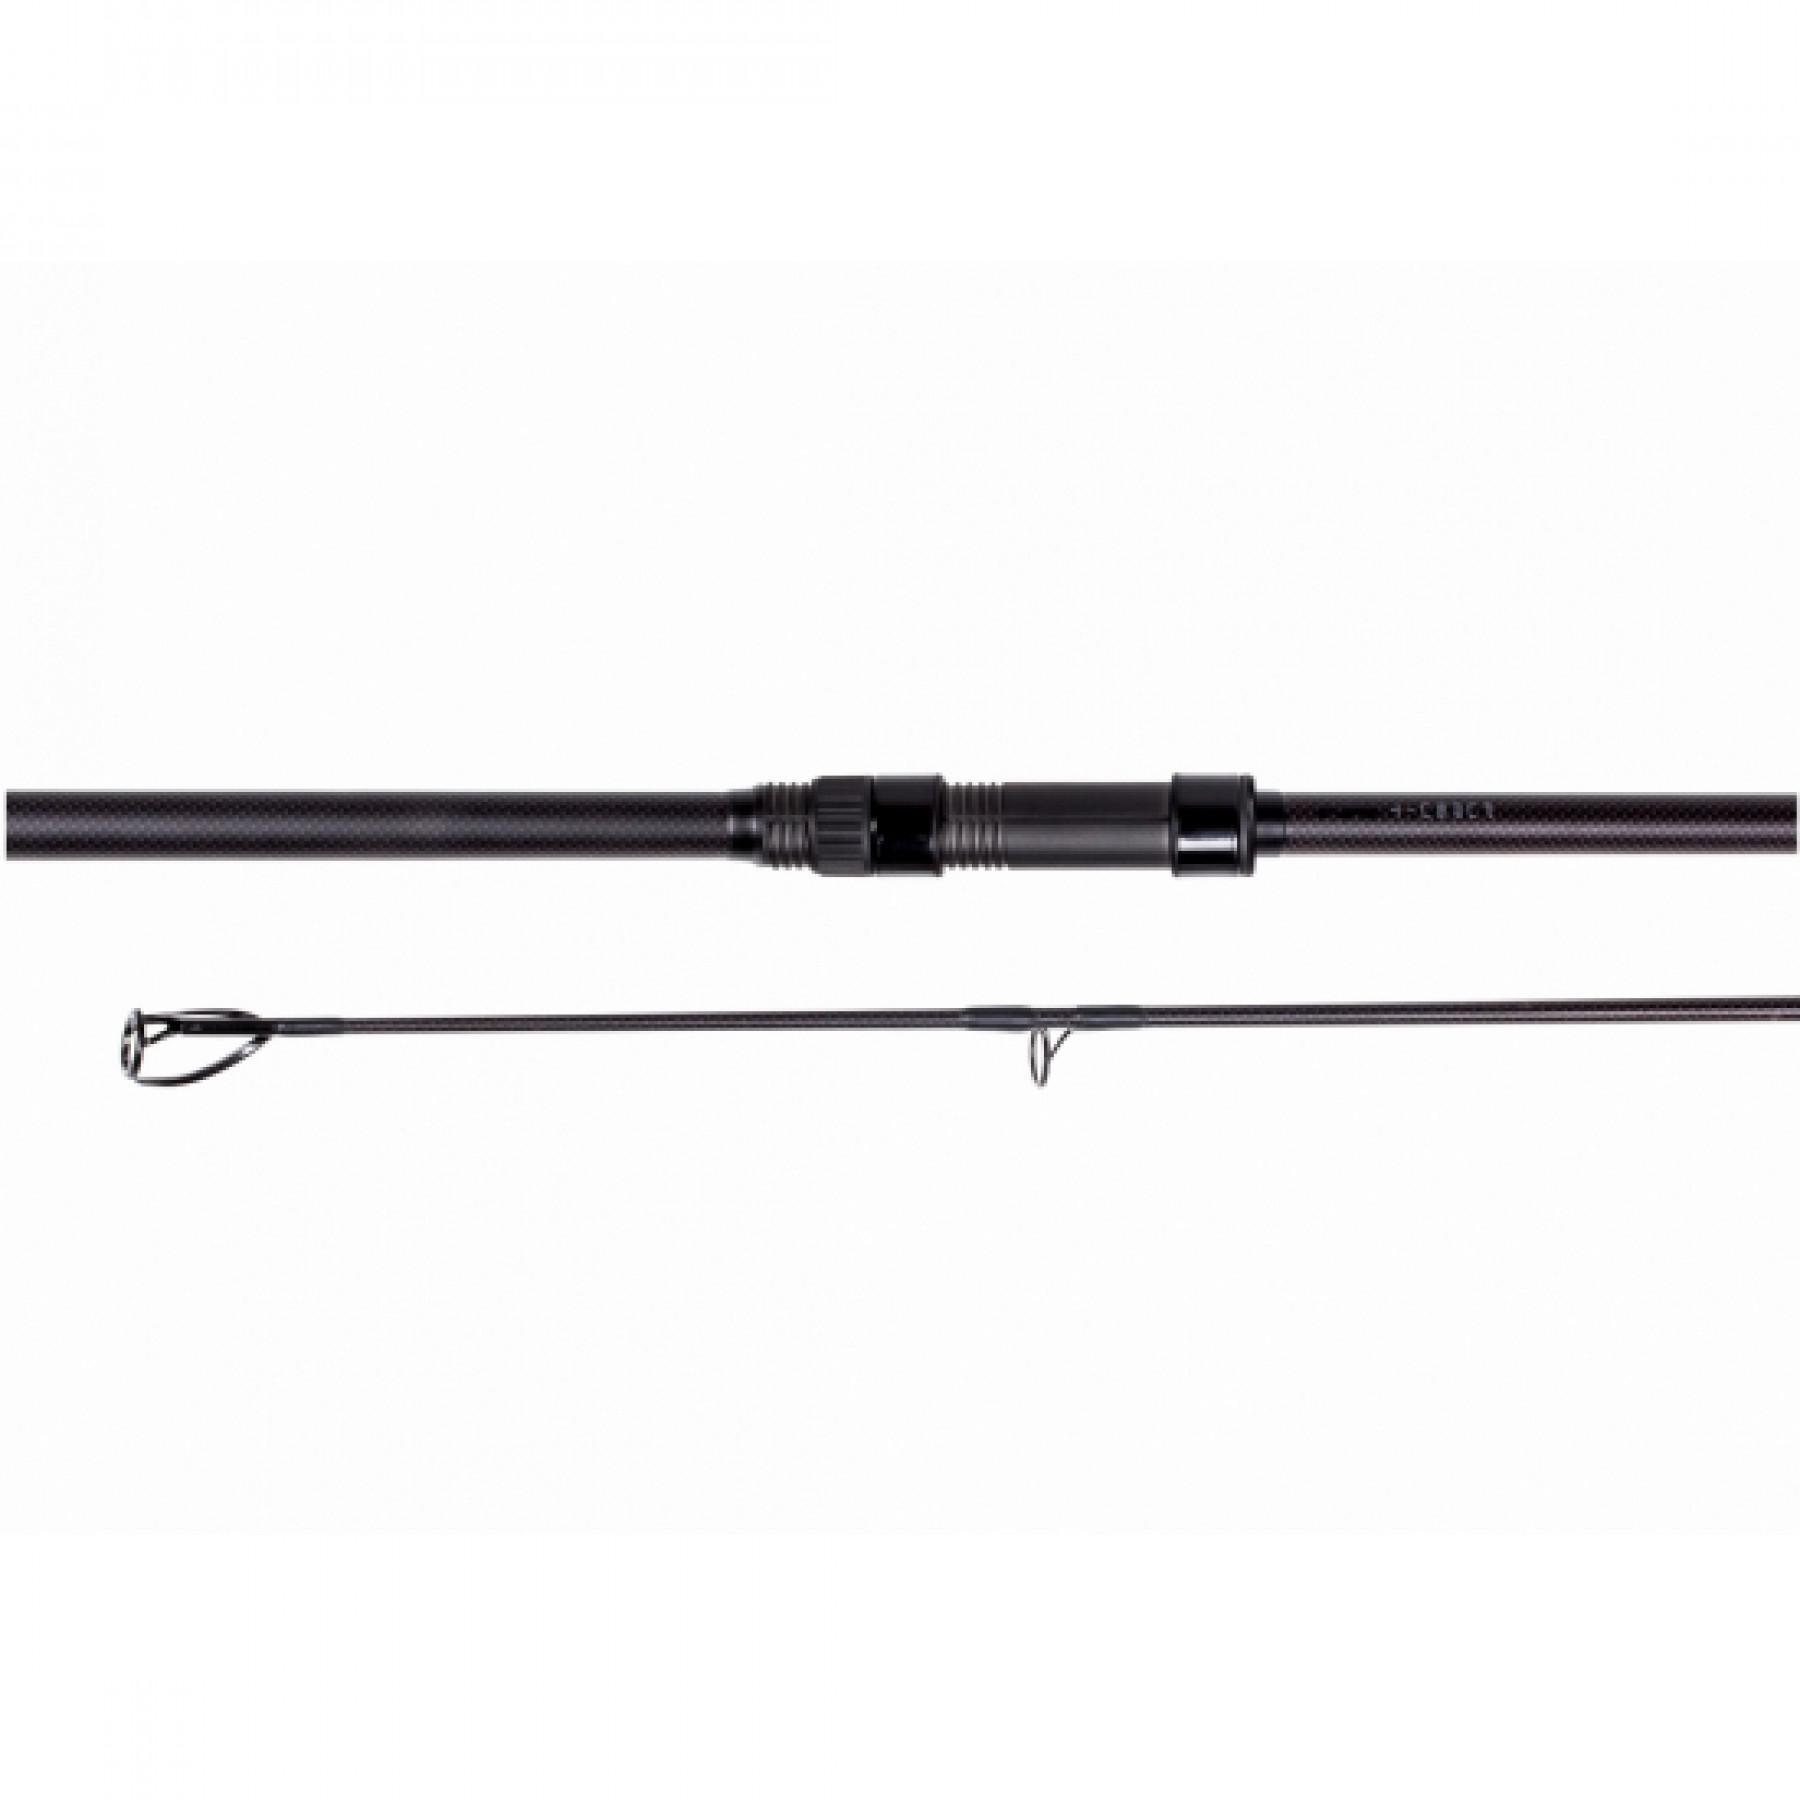 Fishing rod Nash Pursuit 10 foot 3.5 lb S (Stepped Up) Abbreviated